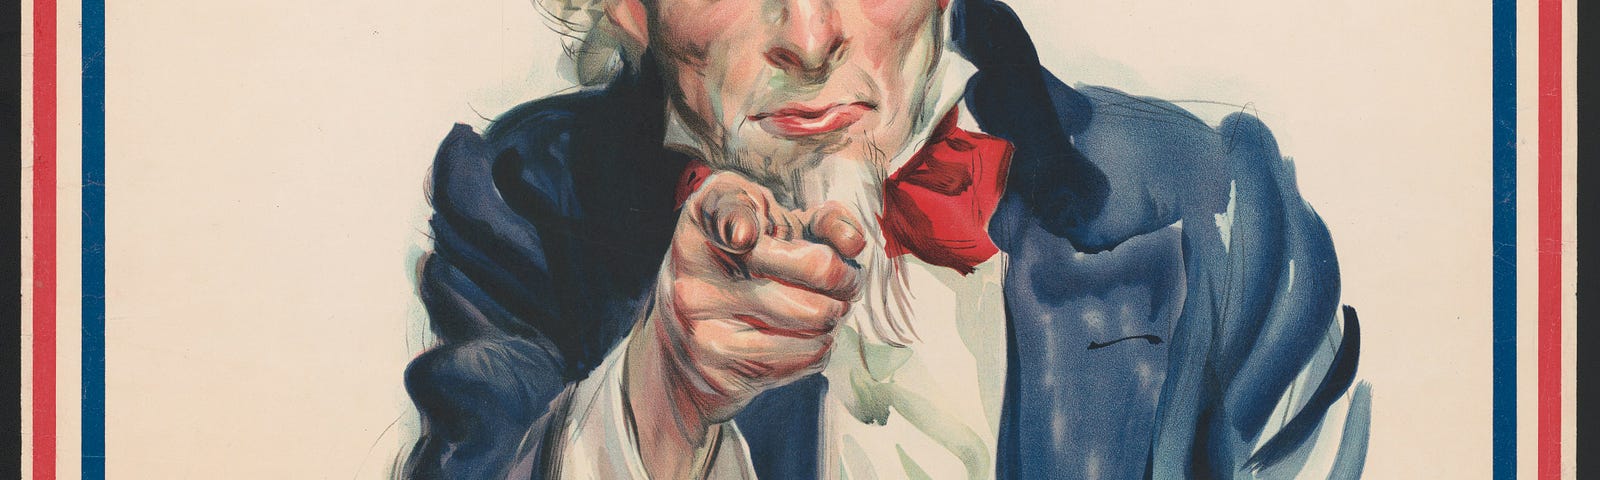 Picture of Uncle Sam, depicted as an older white bearded gentleman pointing at the viewer. Underneath reads the caption: I Want YOU for US ARMY